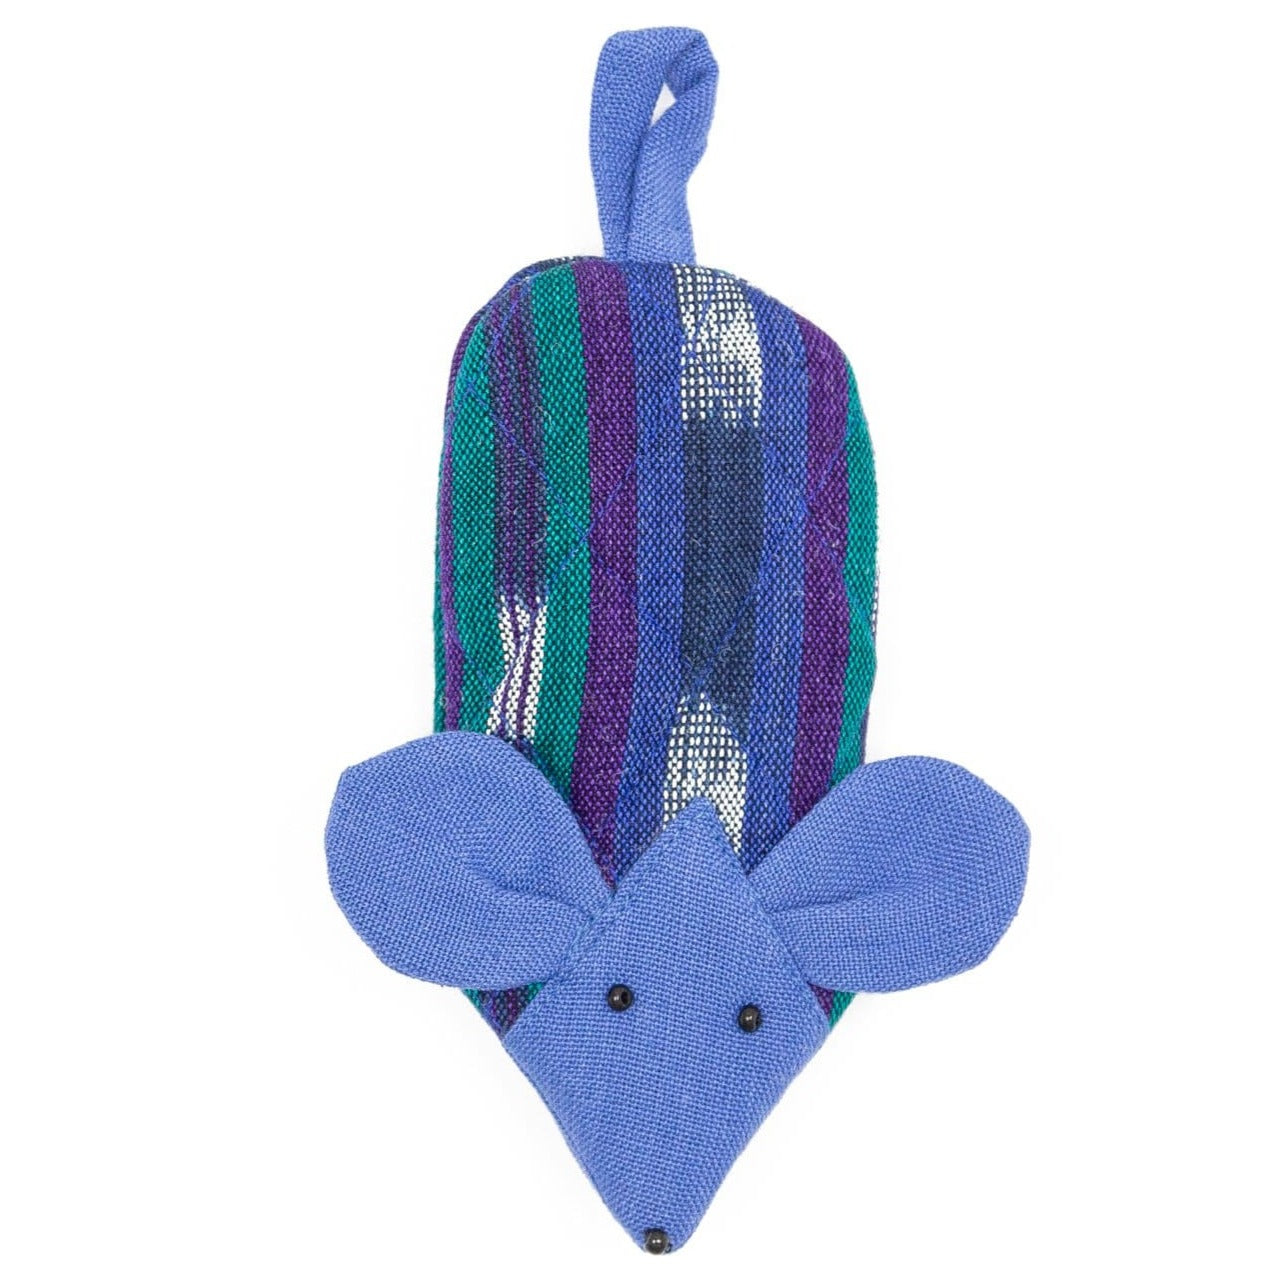 Ditch oven mitts! Mouse Skillet Handle Holder - heat-resistant, cute mouse designs, handmade in Guatemala. Safer grip, unique kitchen gift. Support artisans, shop now!